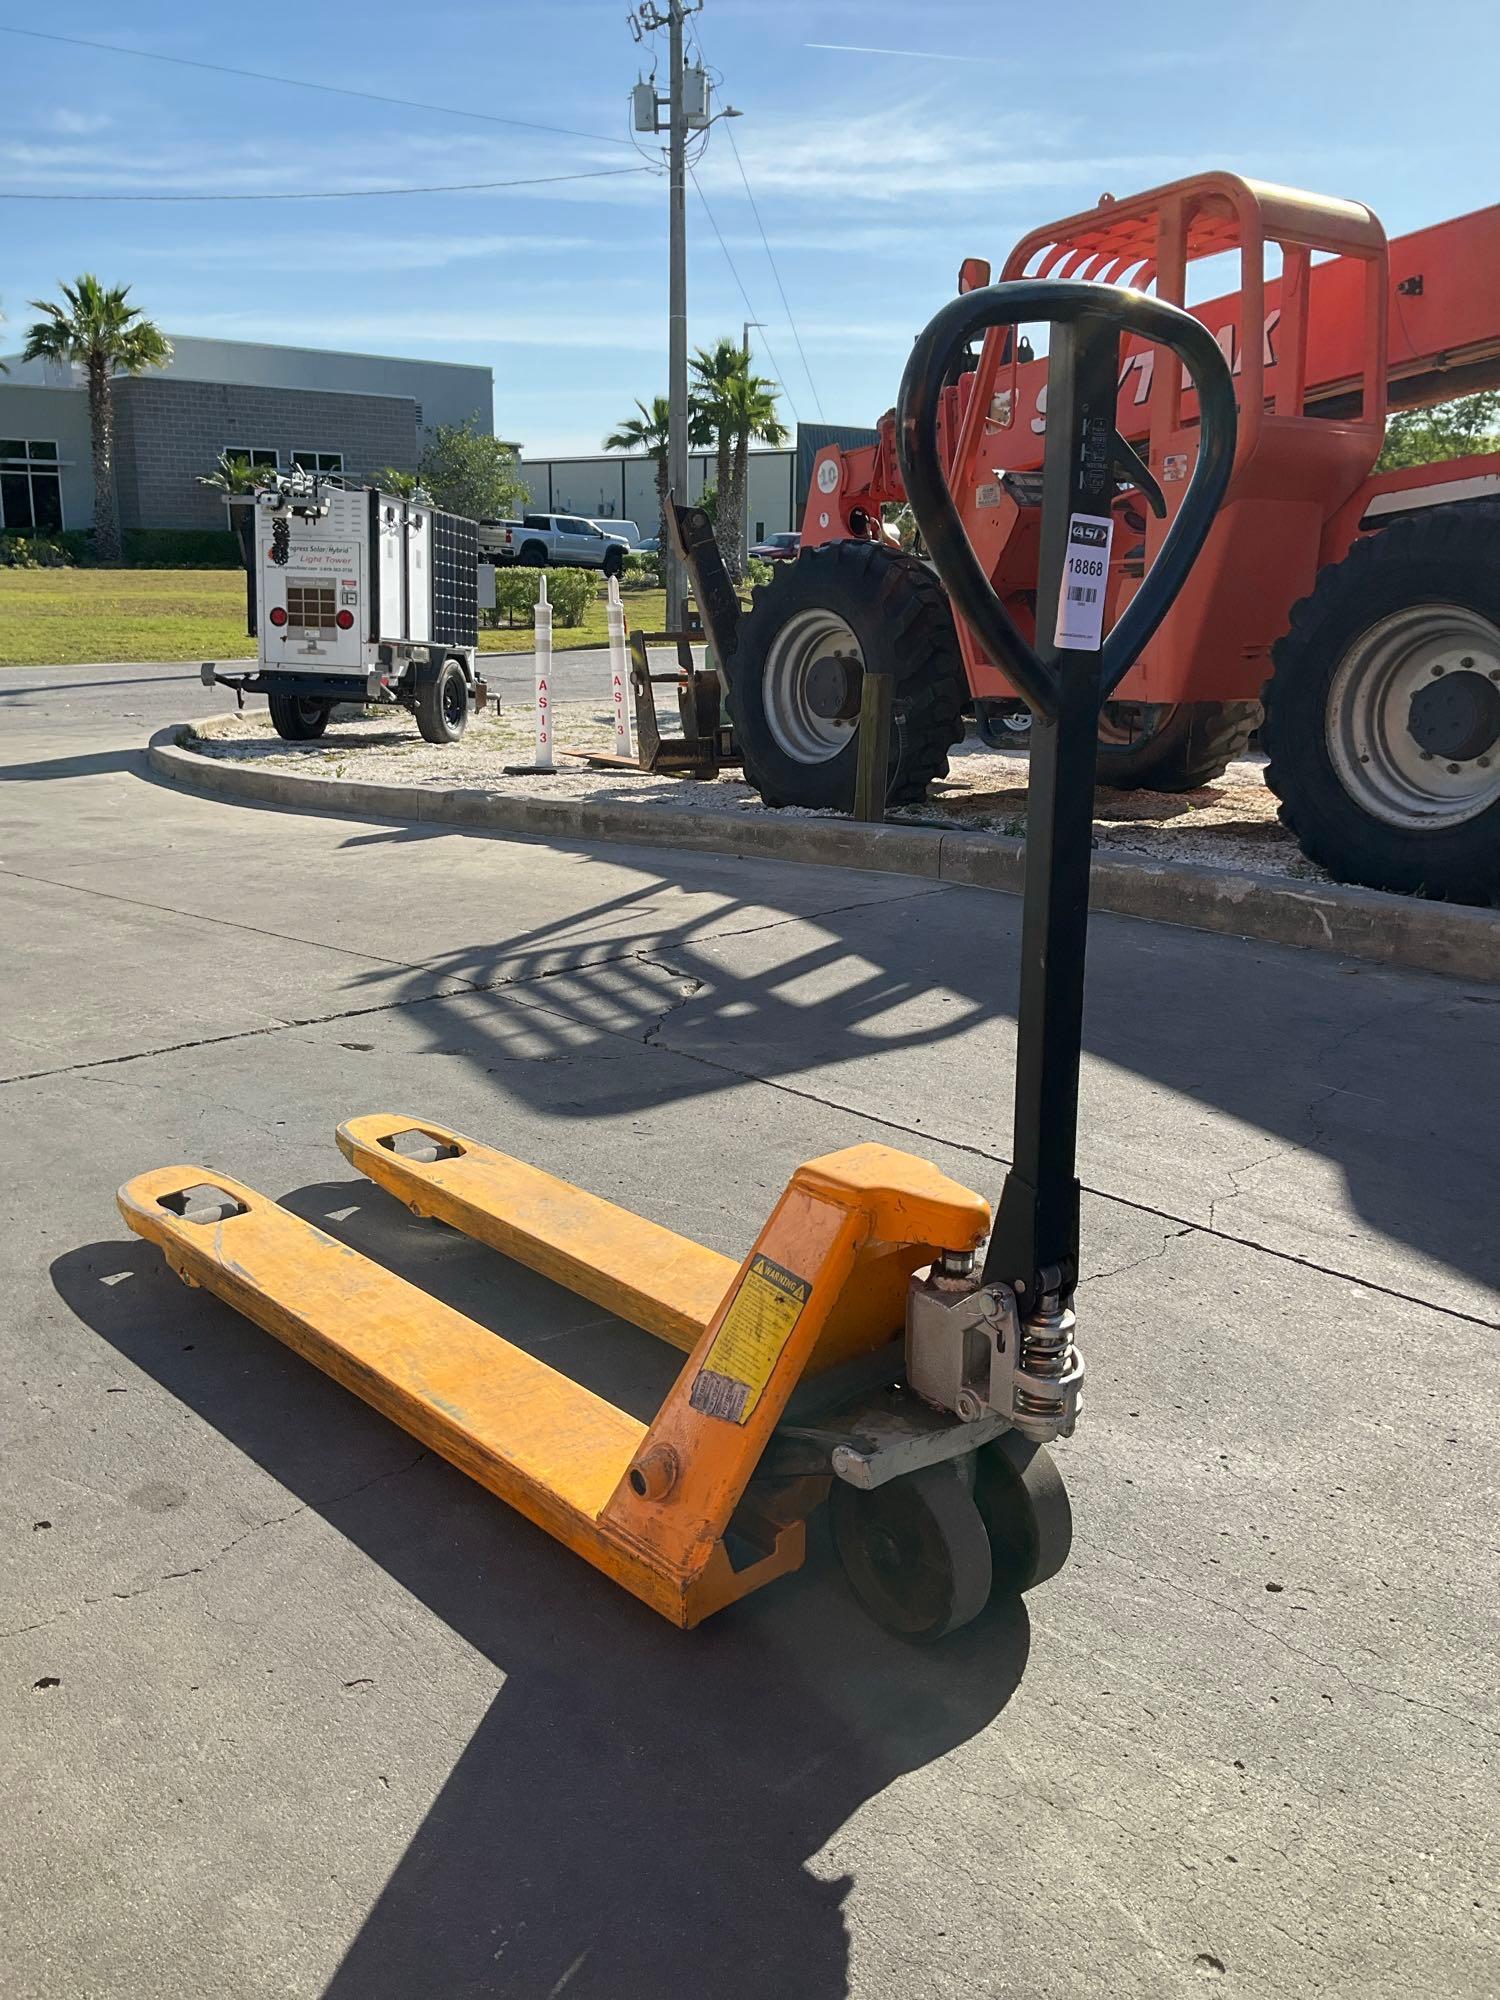 XILIN HYDRAULIC PALLET JACK MODEL XET55, APPROX MAX CAPACITY 5500LBS